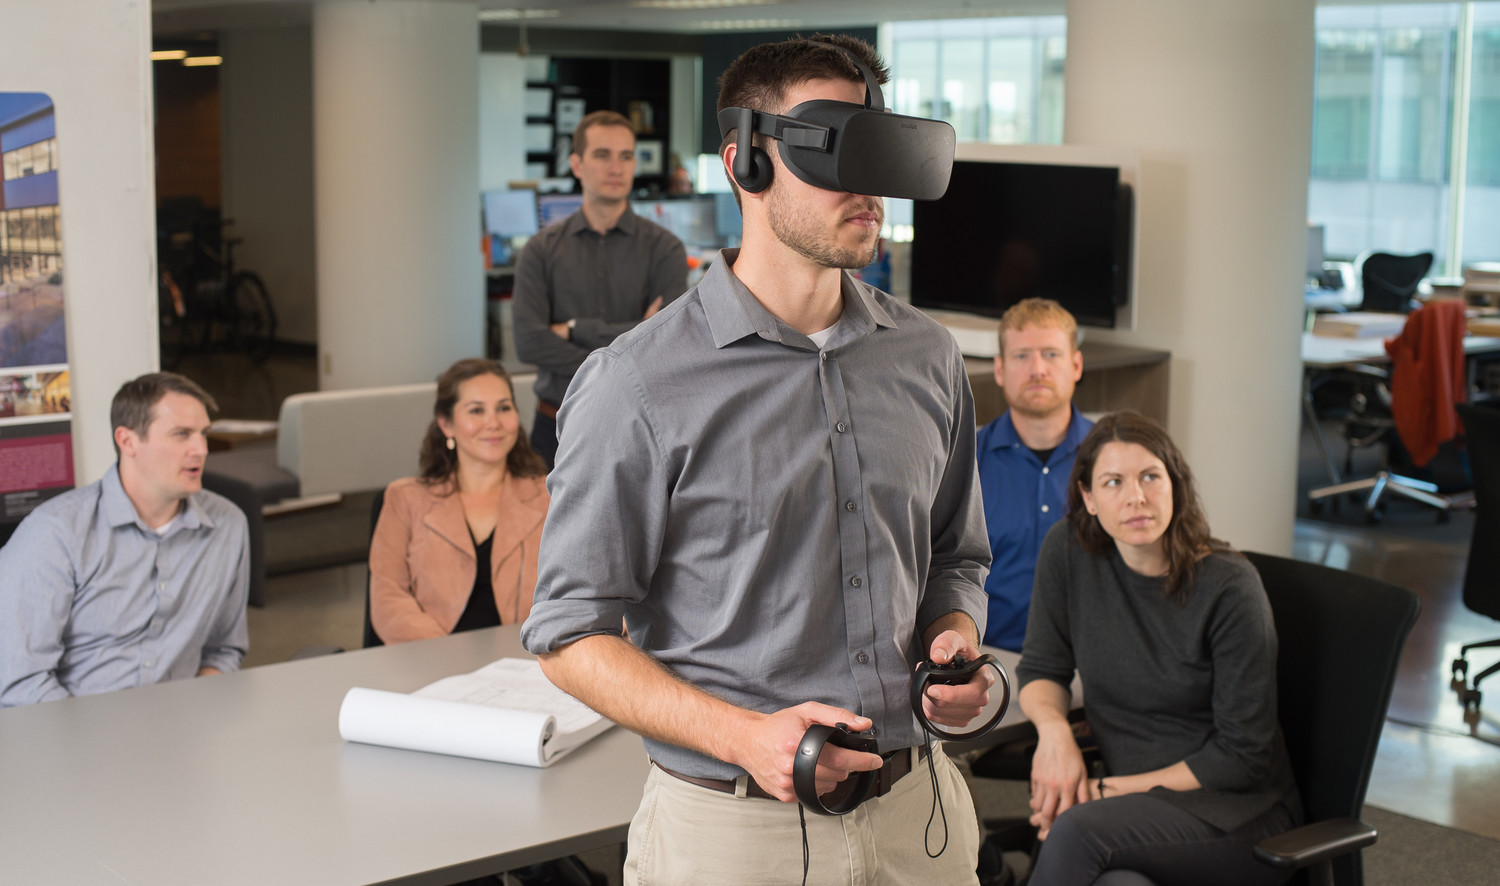 Man uses VR headset and controls in front of table with 5 people in white office, desks back right. Pad of paper on table